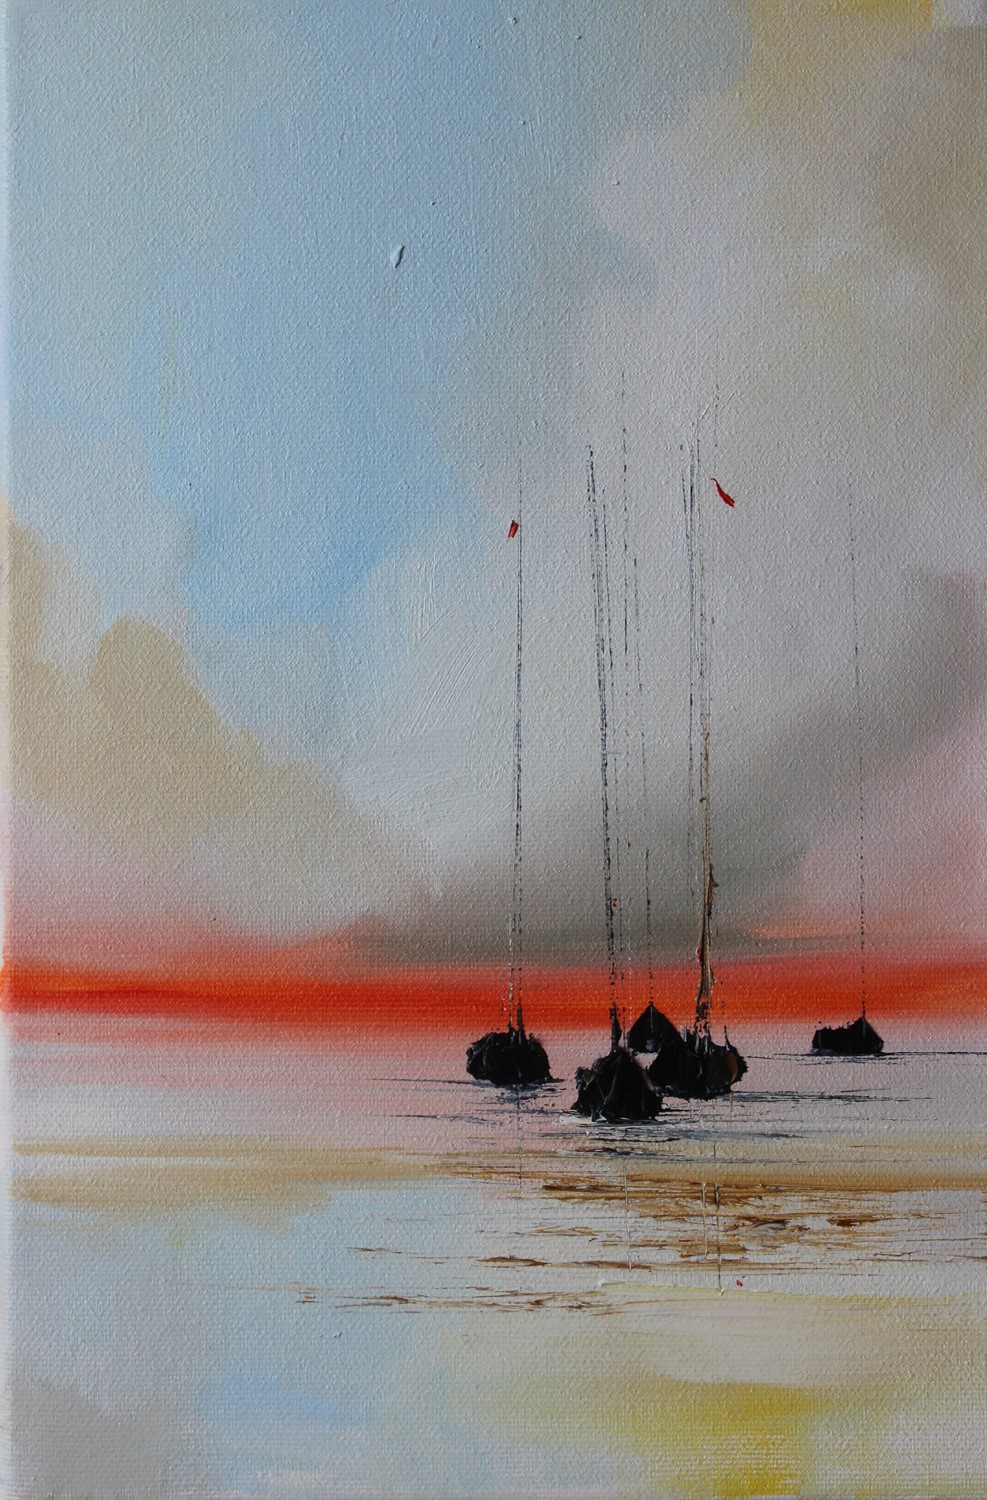 'At the end of the sailing day' by artist Rosanne Barr